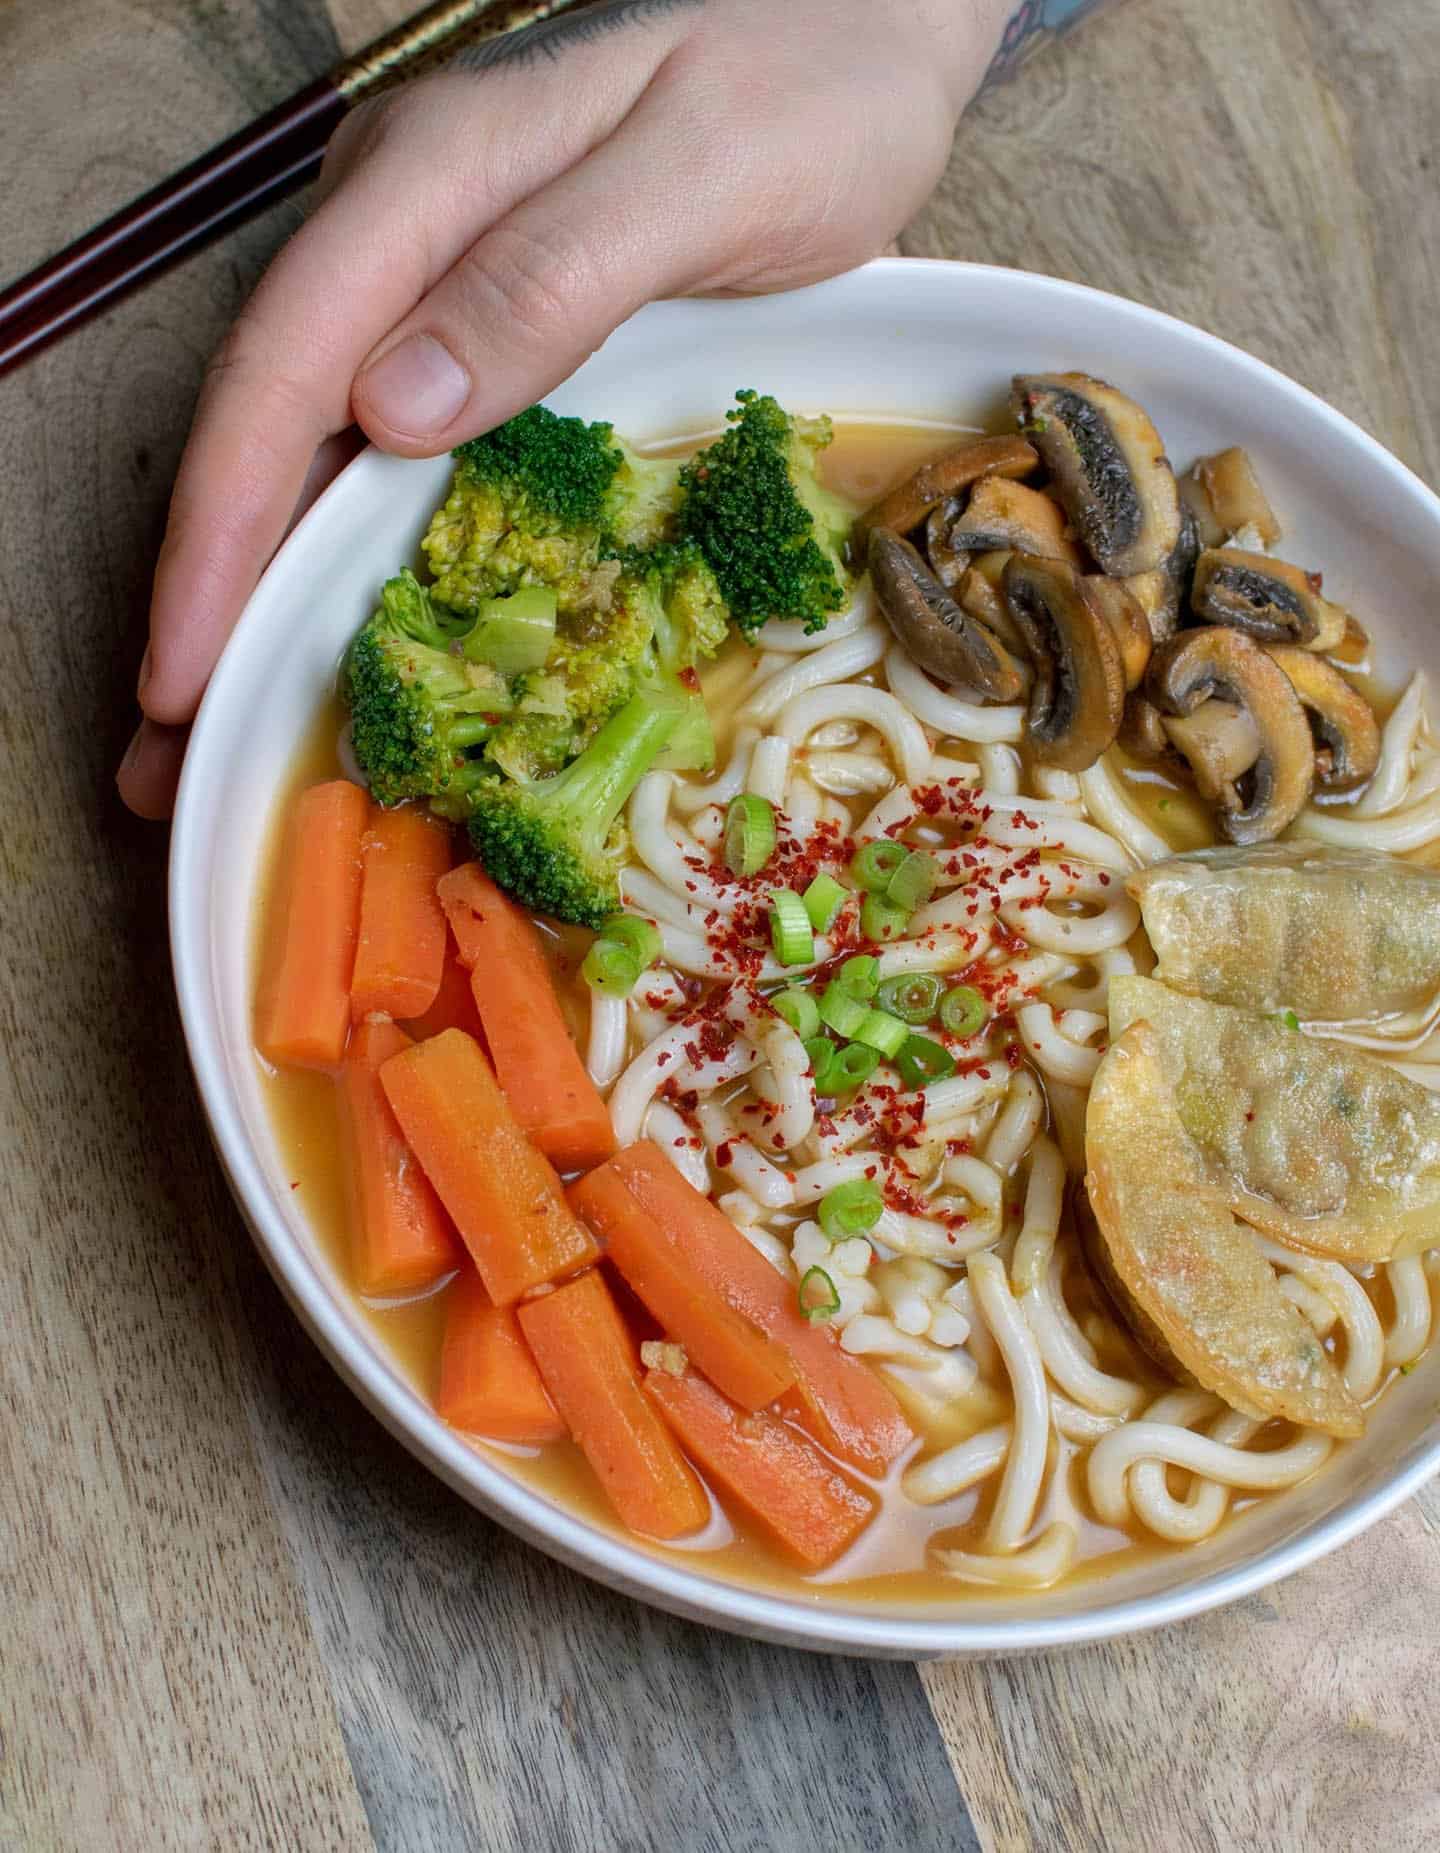 A white bowl full with ramen, broth, mushrooms, broccoli, carrots and gyozas is being cradled by a hand.